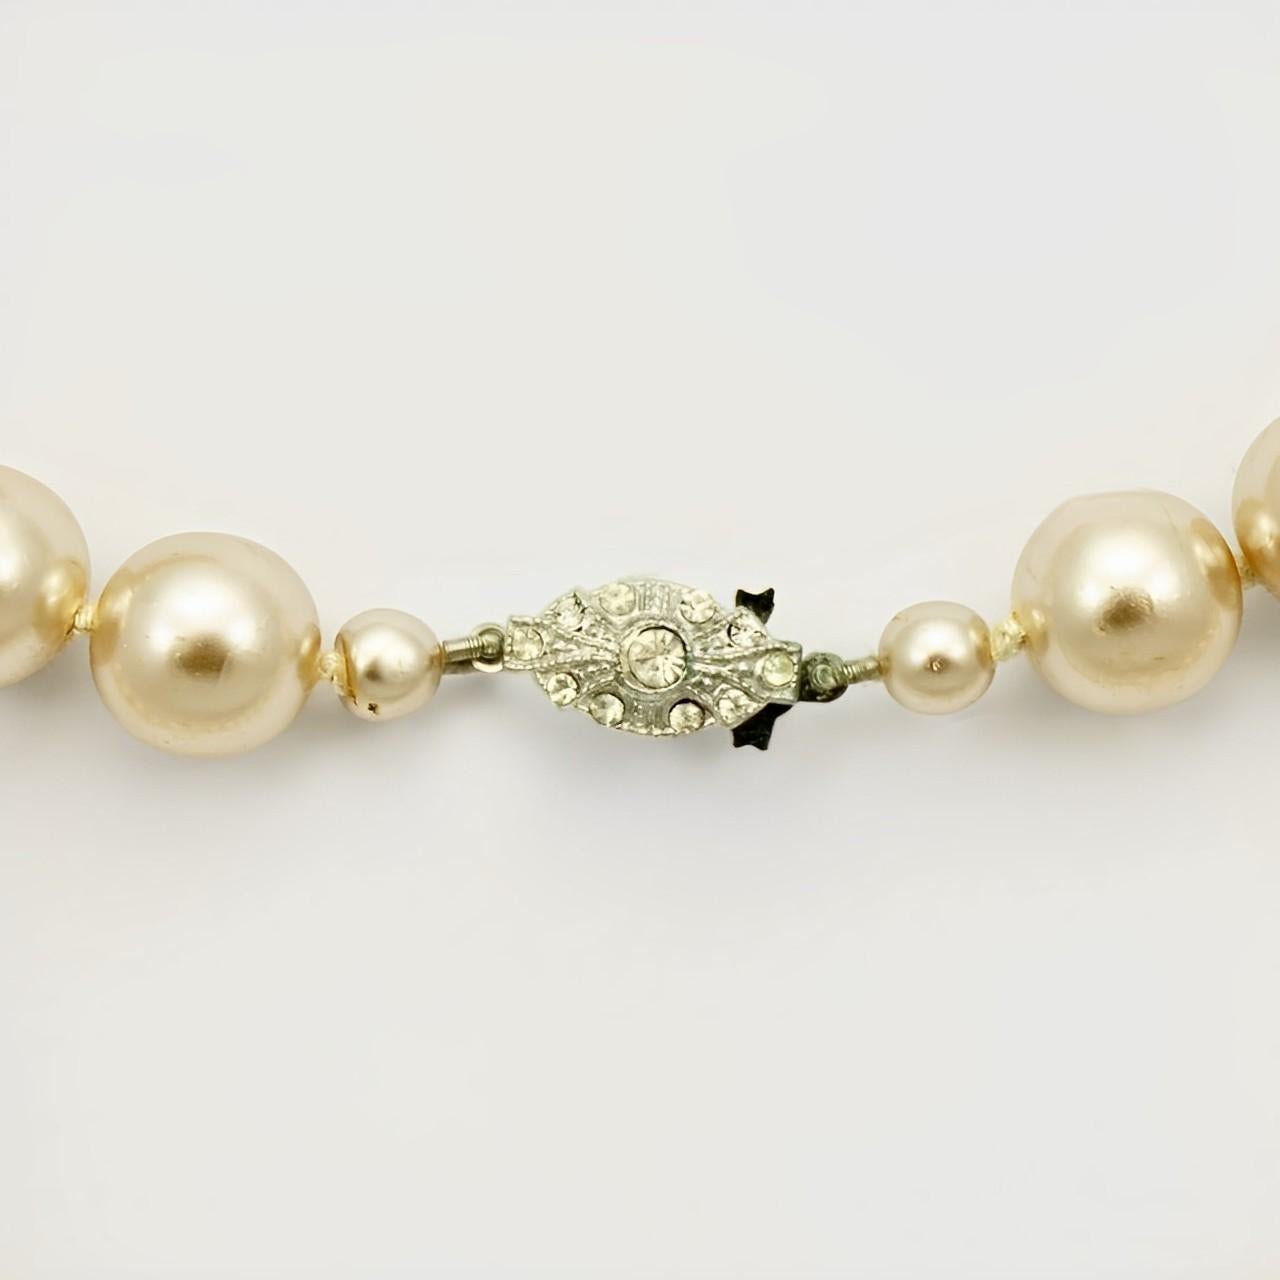 Beautiful champagne glass pearl necklace featuring a silver tone clasp set with rhinestones. The lustrous pearls are knotted between each pearl. Measuring length 81 cm / 31.8 inches. The pearls are 12 mm / .47 inch. The necklace is in very good